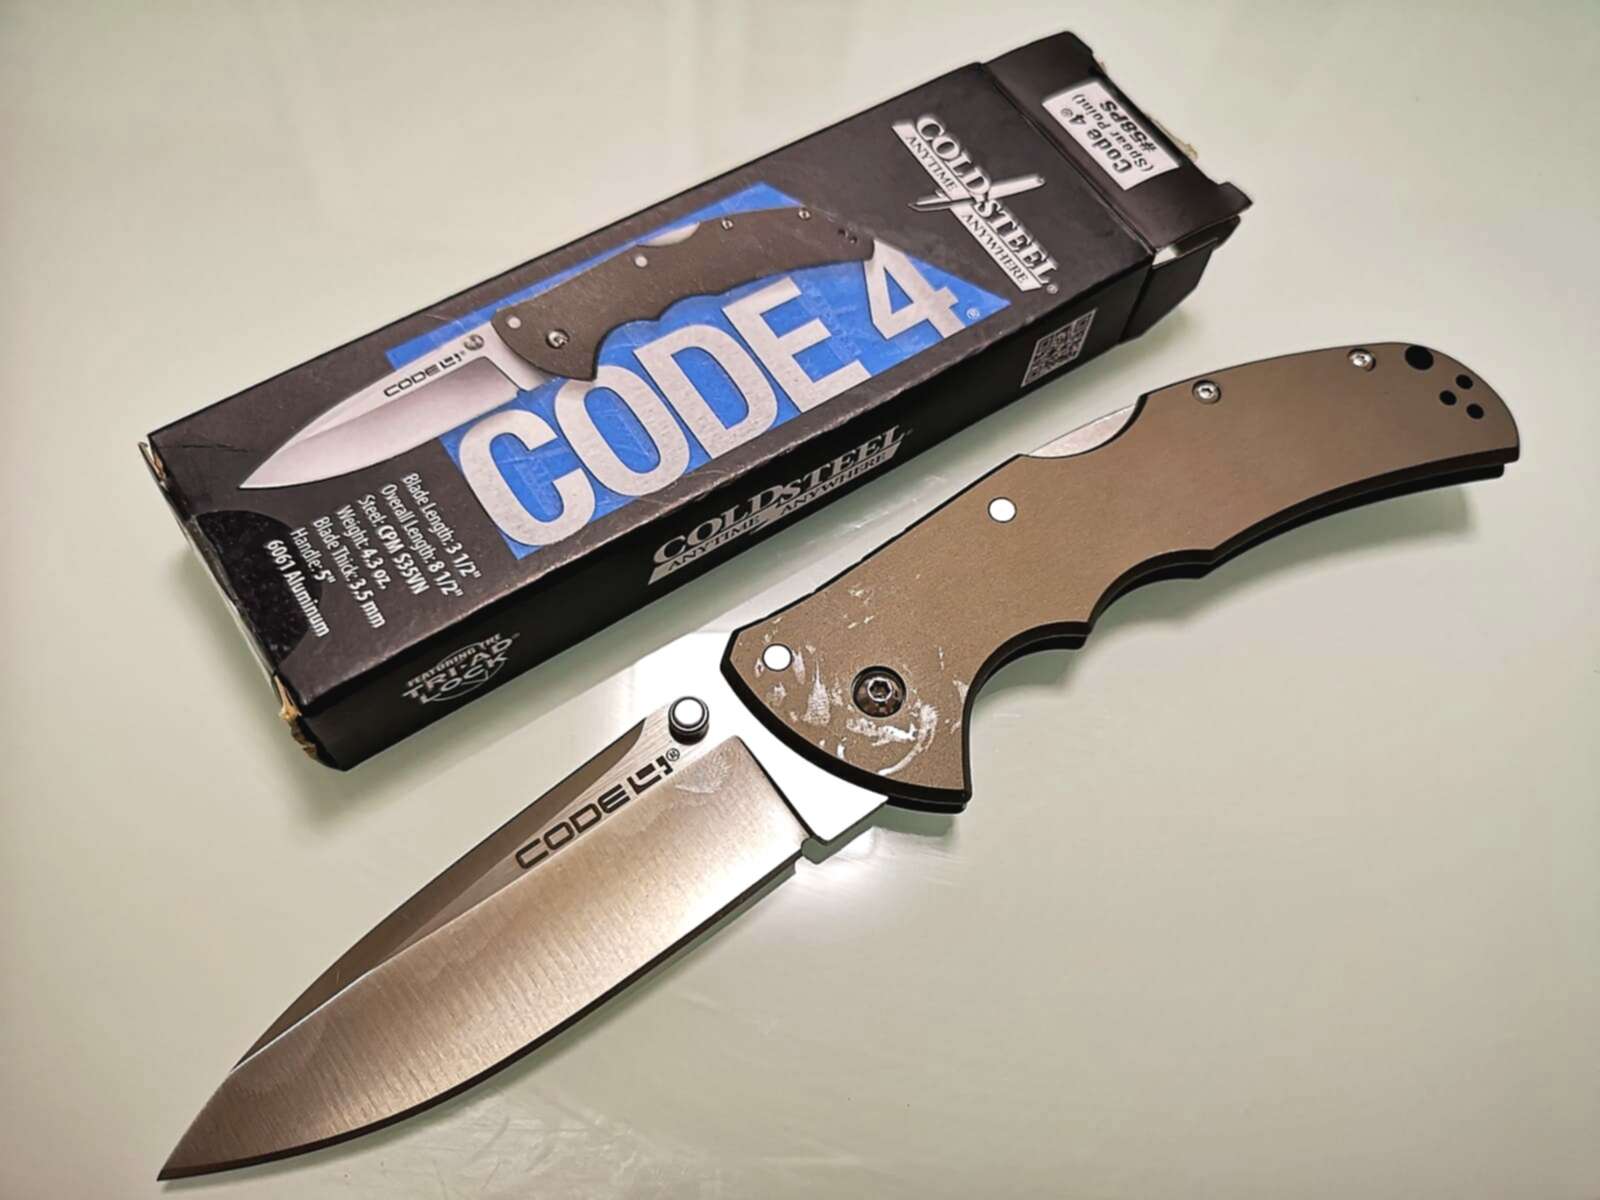 Cold steel 4. Cold Steel с75. Колд стил код 4. Cold Steel 58ps code-4 Spear point Plain. Cold Steel CST-95boask.